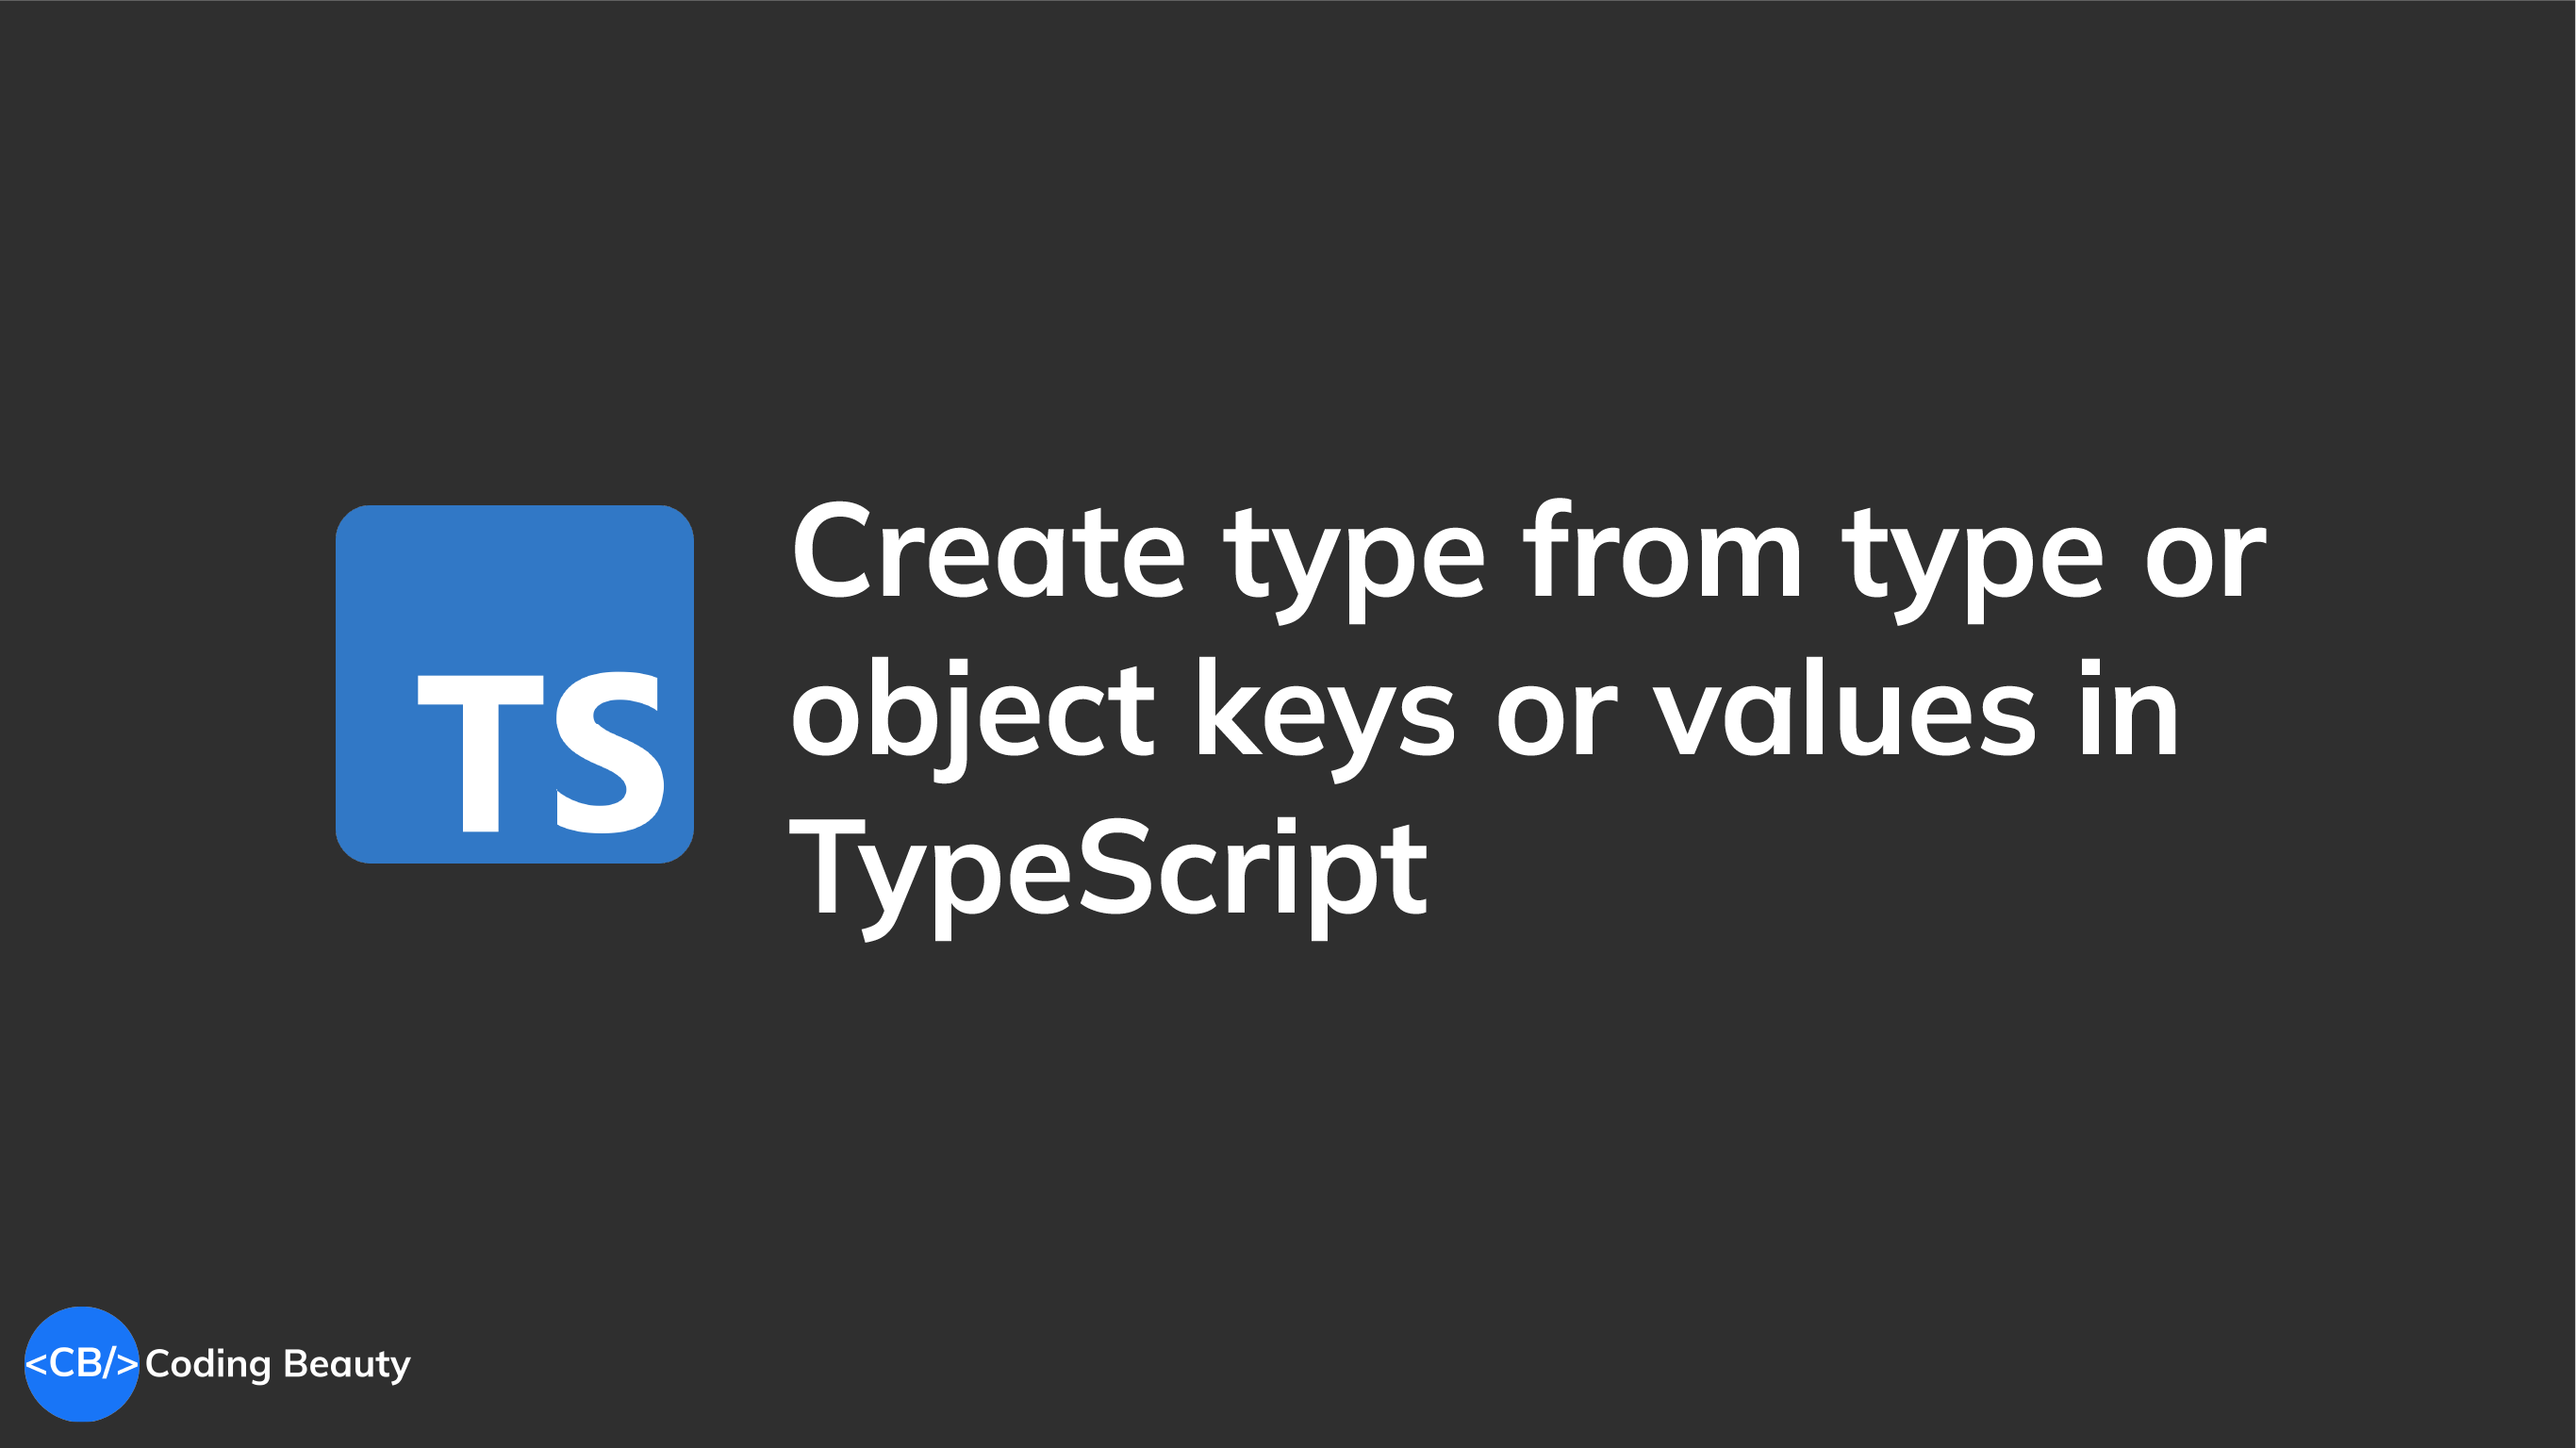 How to create a type from type or object keys or values in TypeScript